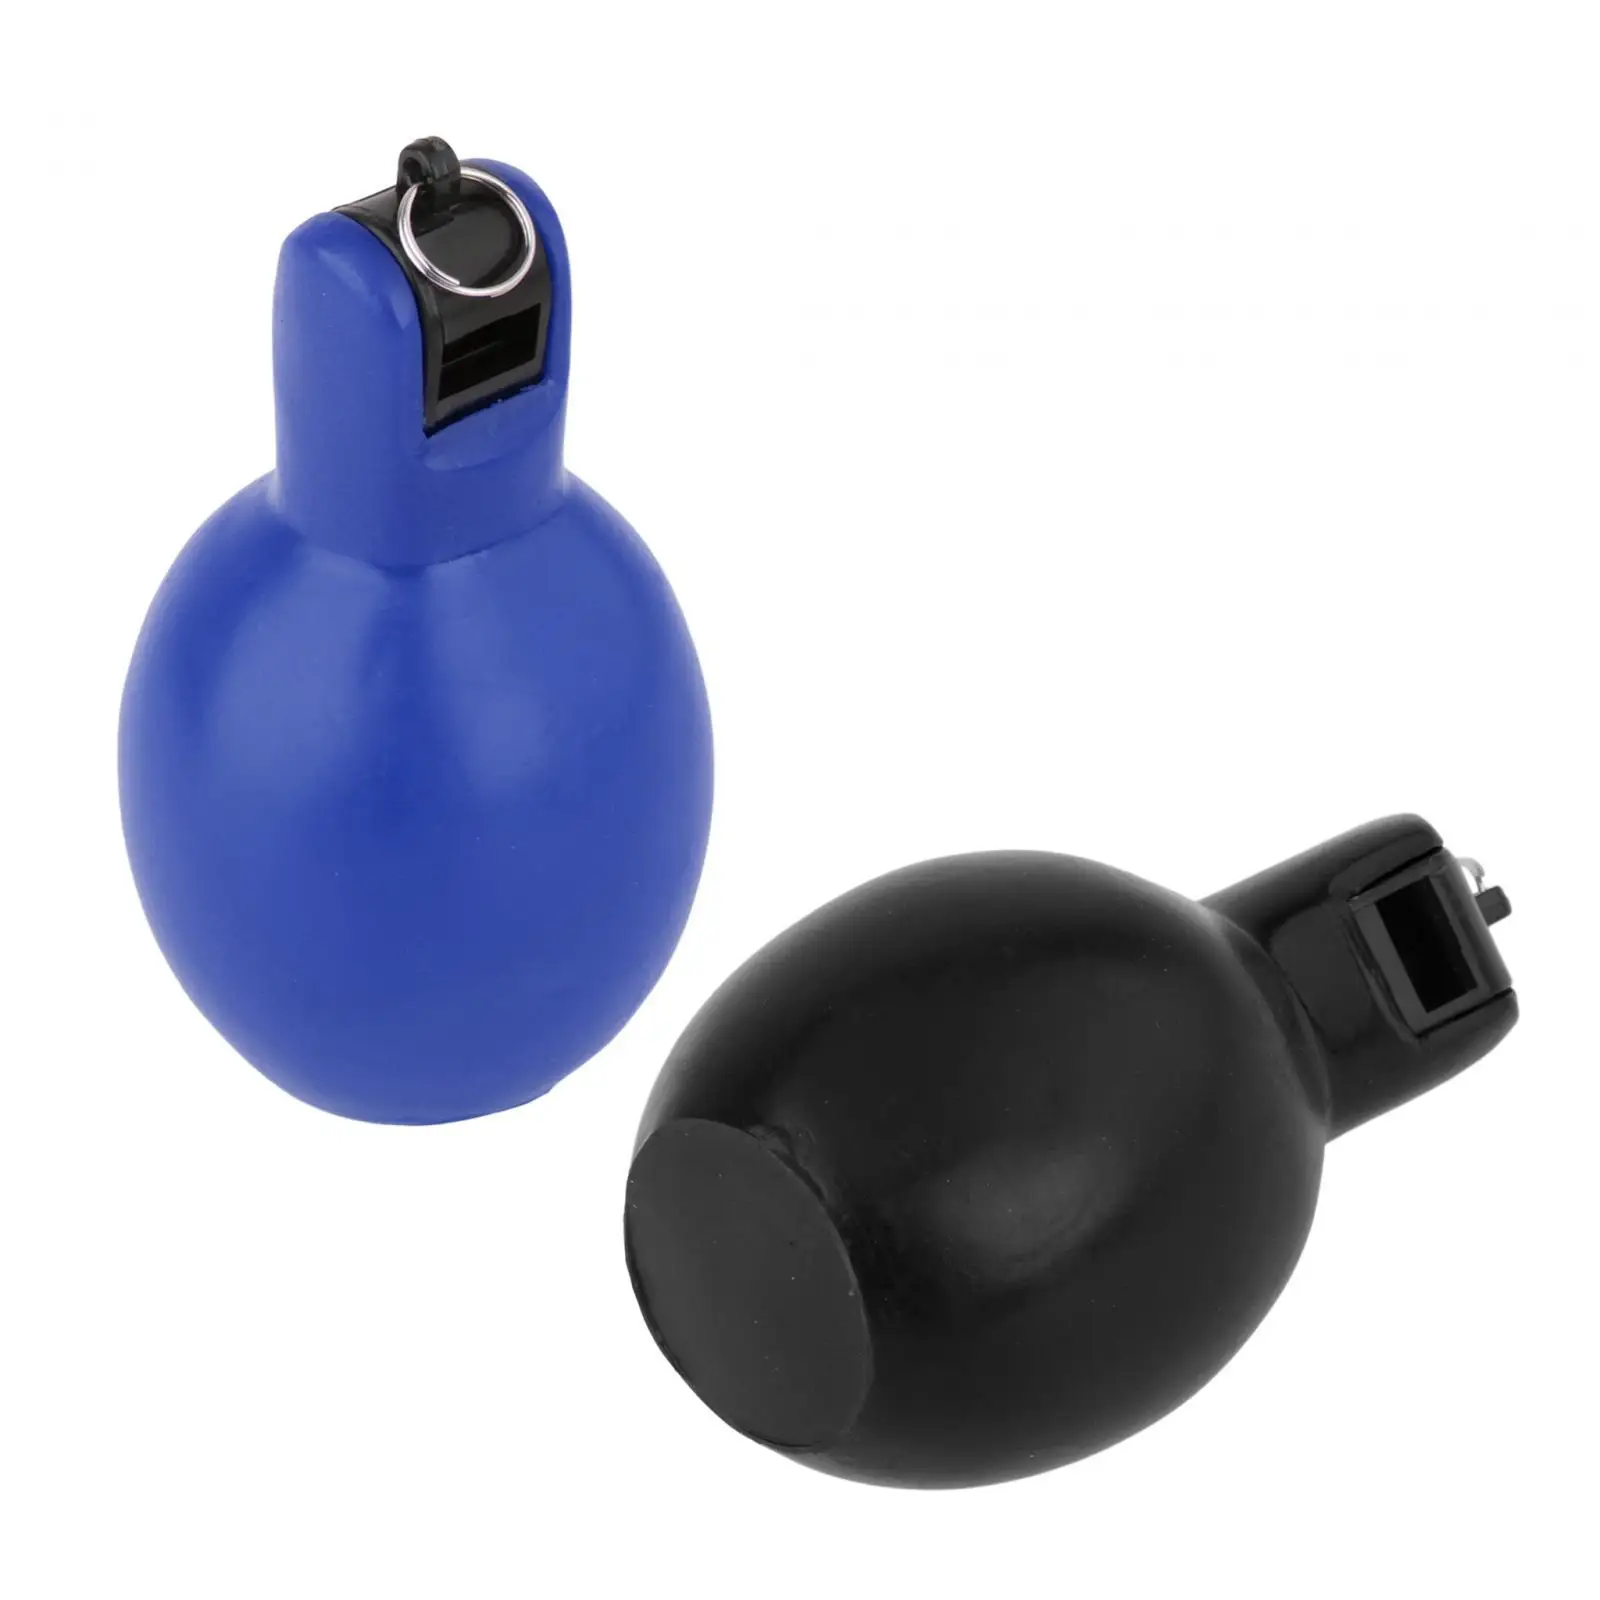 2 Pcs Hand Squeeze Whistles Coaches Whistle Soft PVC Handheld Sports Whistle